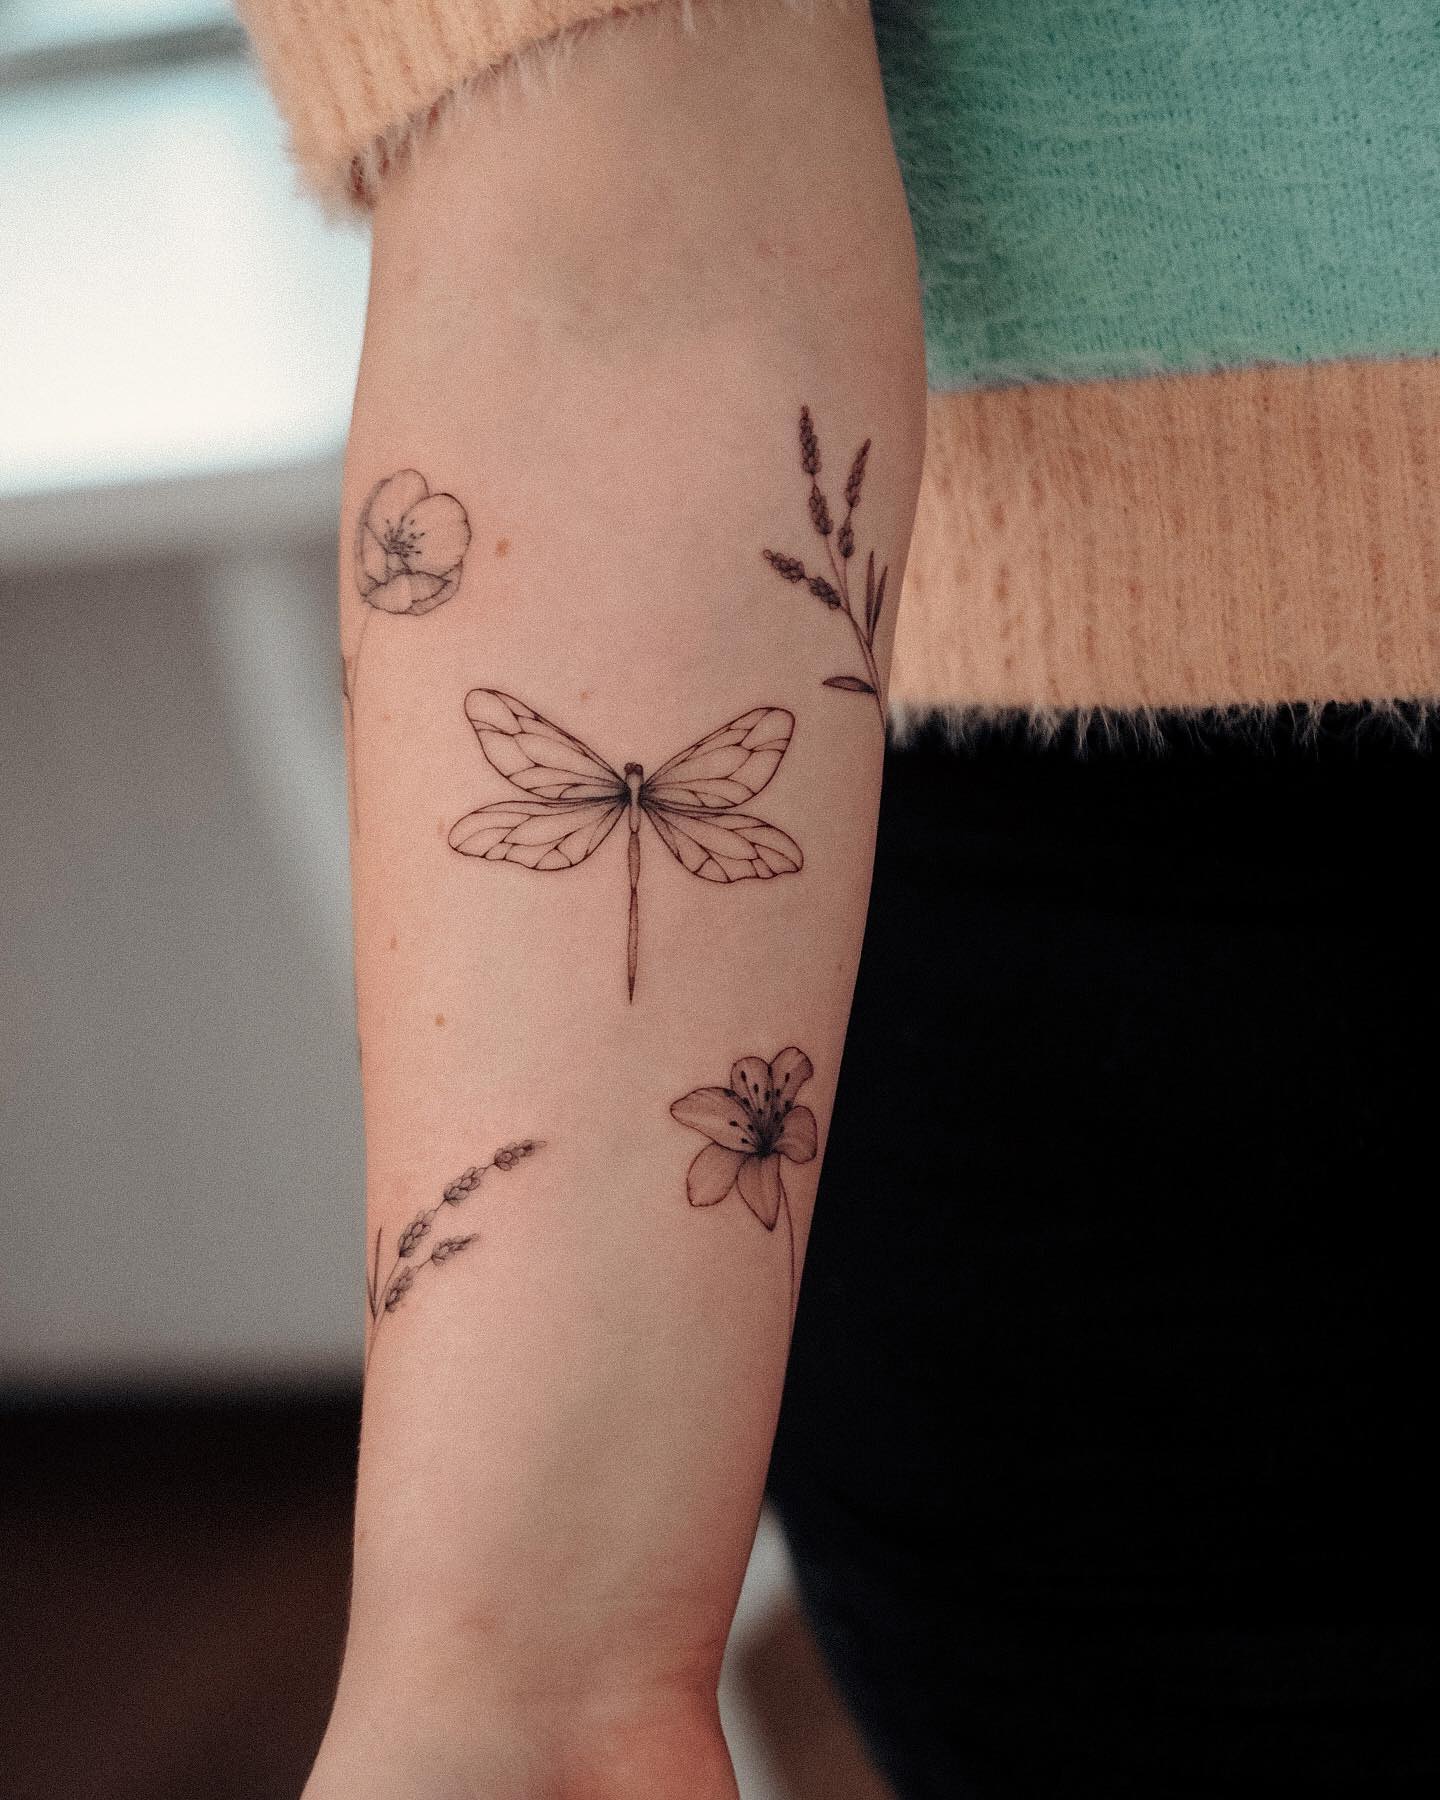 200 Dragonfly Tattoos That Celebrate The Transience Of Life